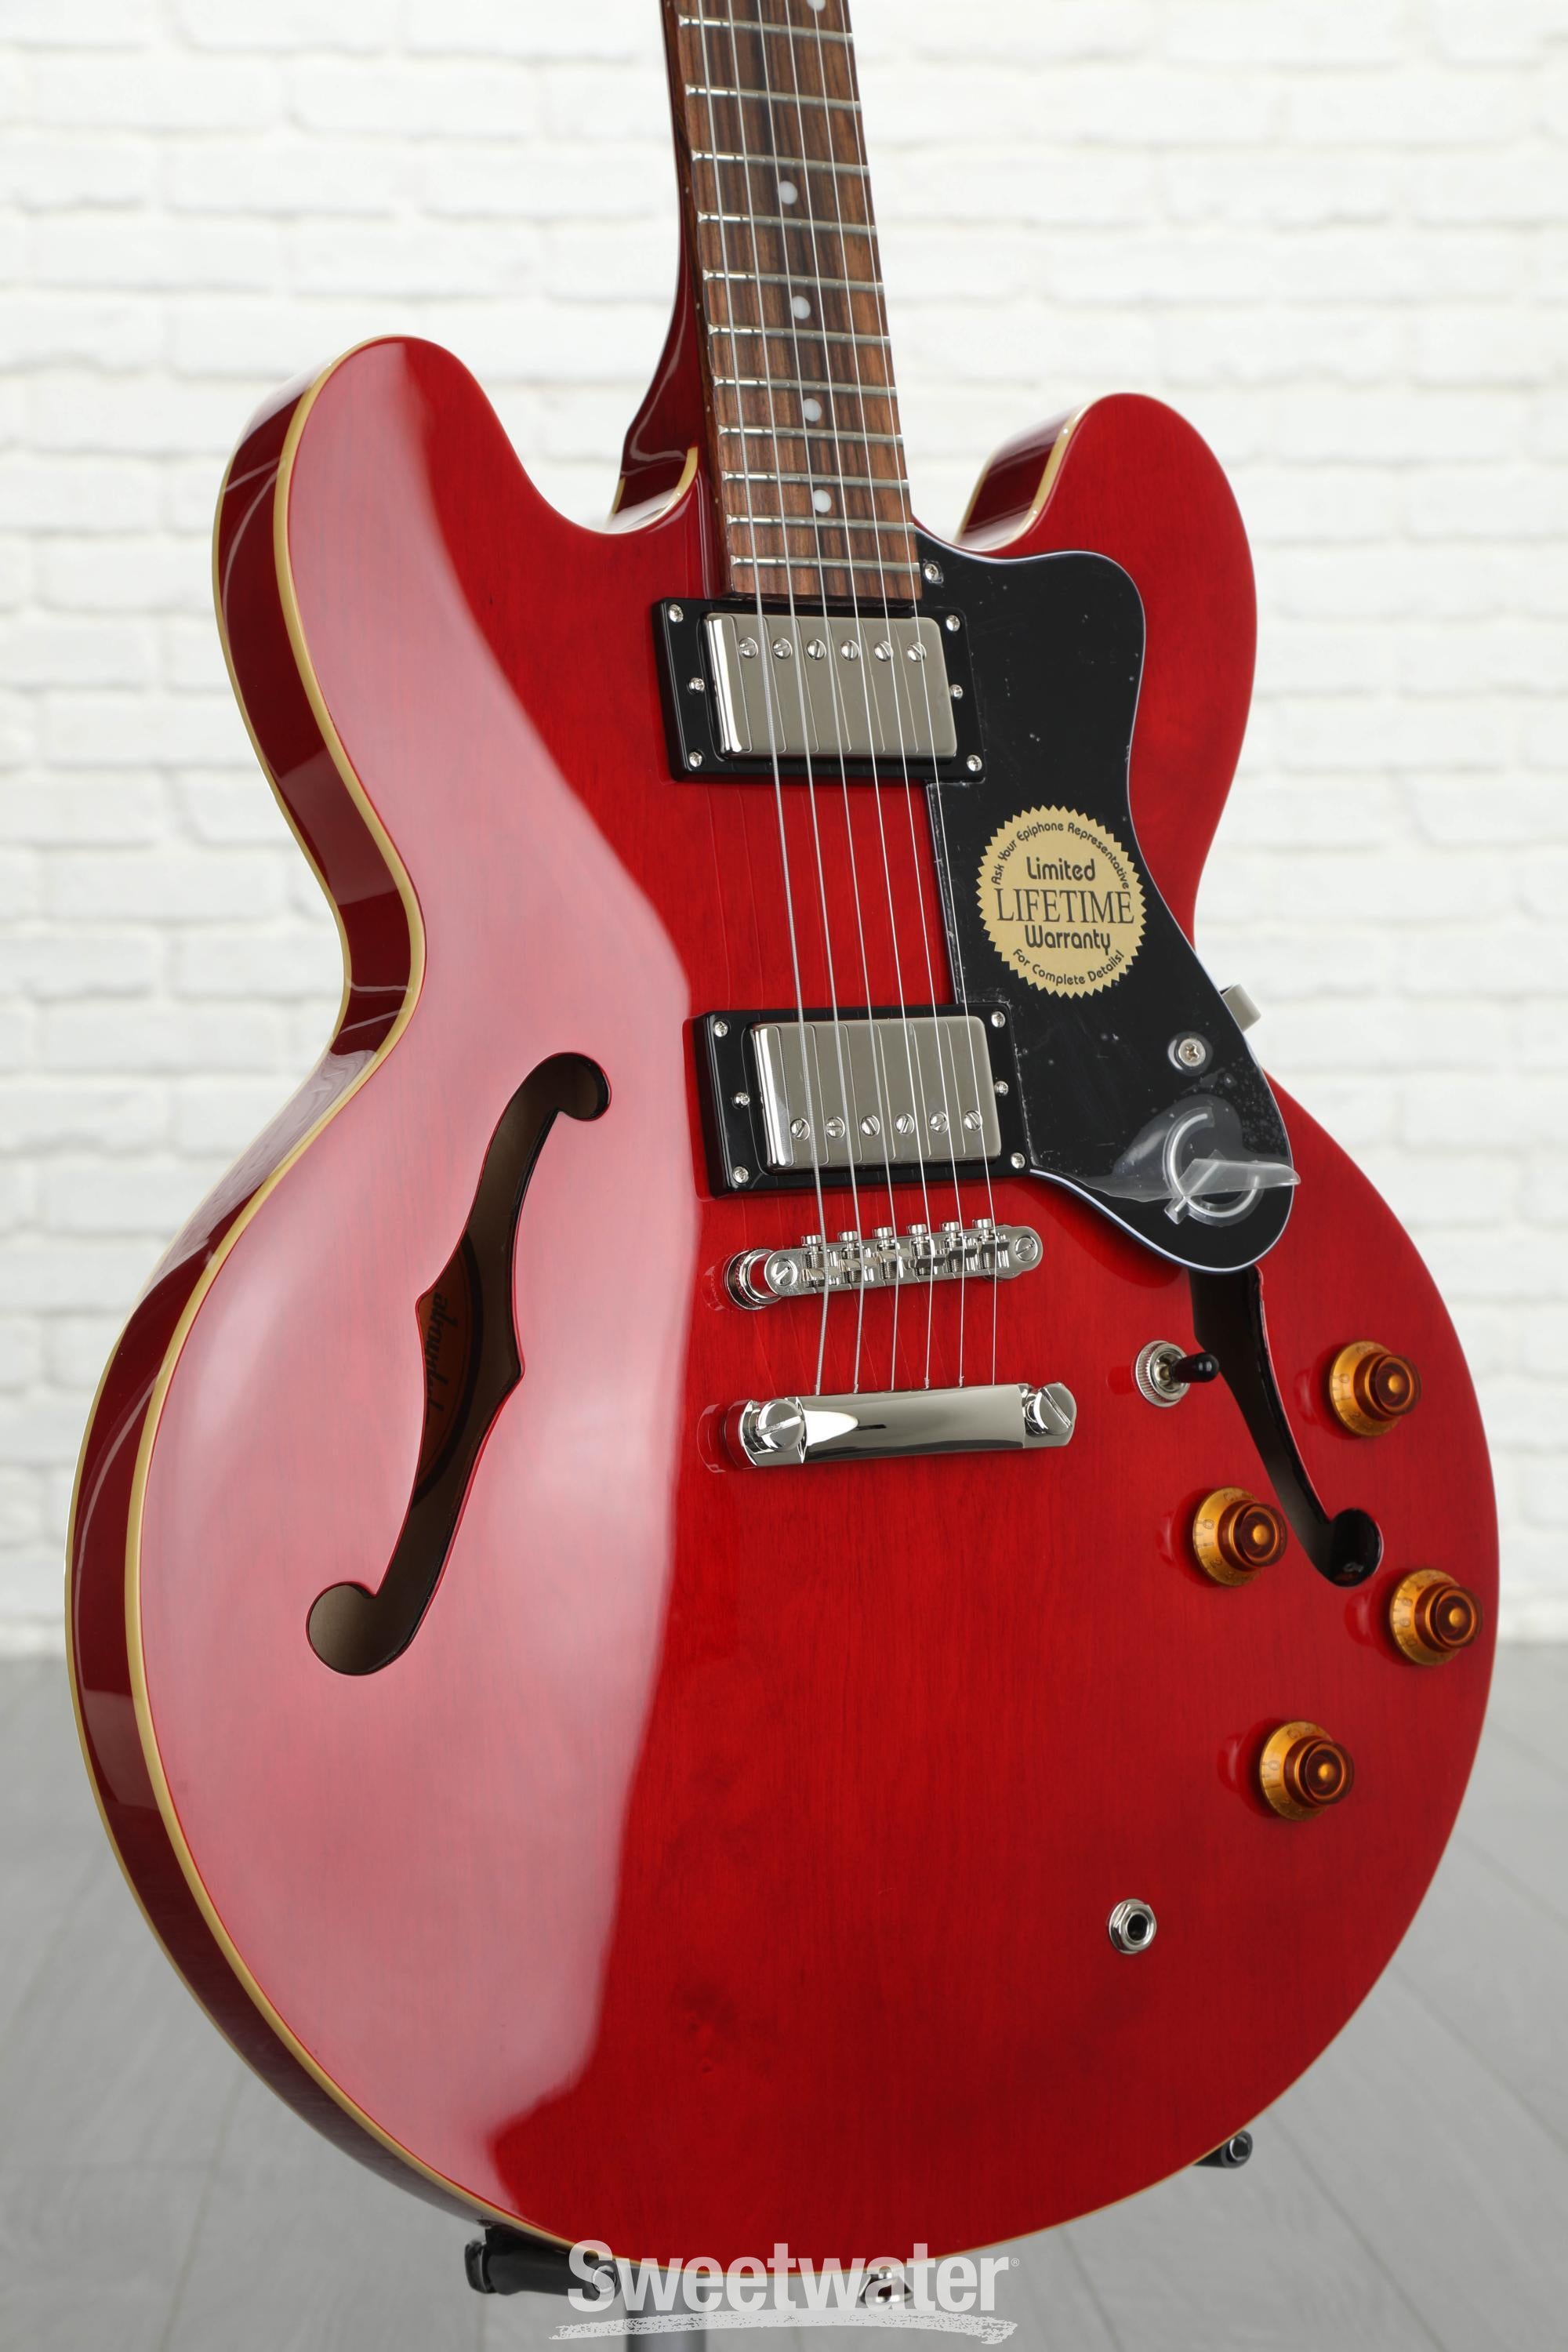 Epiphone Dot Semi-Hollow Electric Guitar - Cherry Reviews | Sweetwater